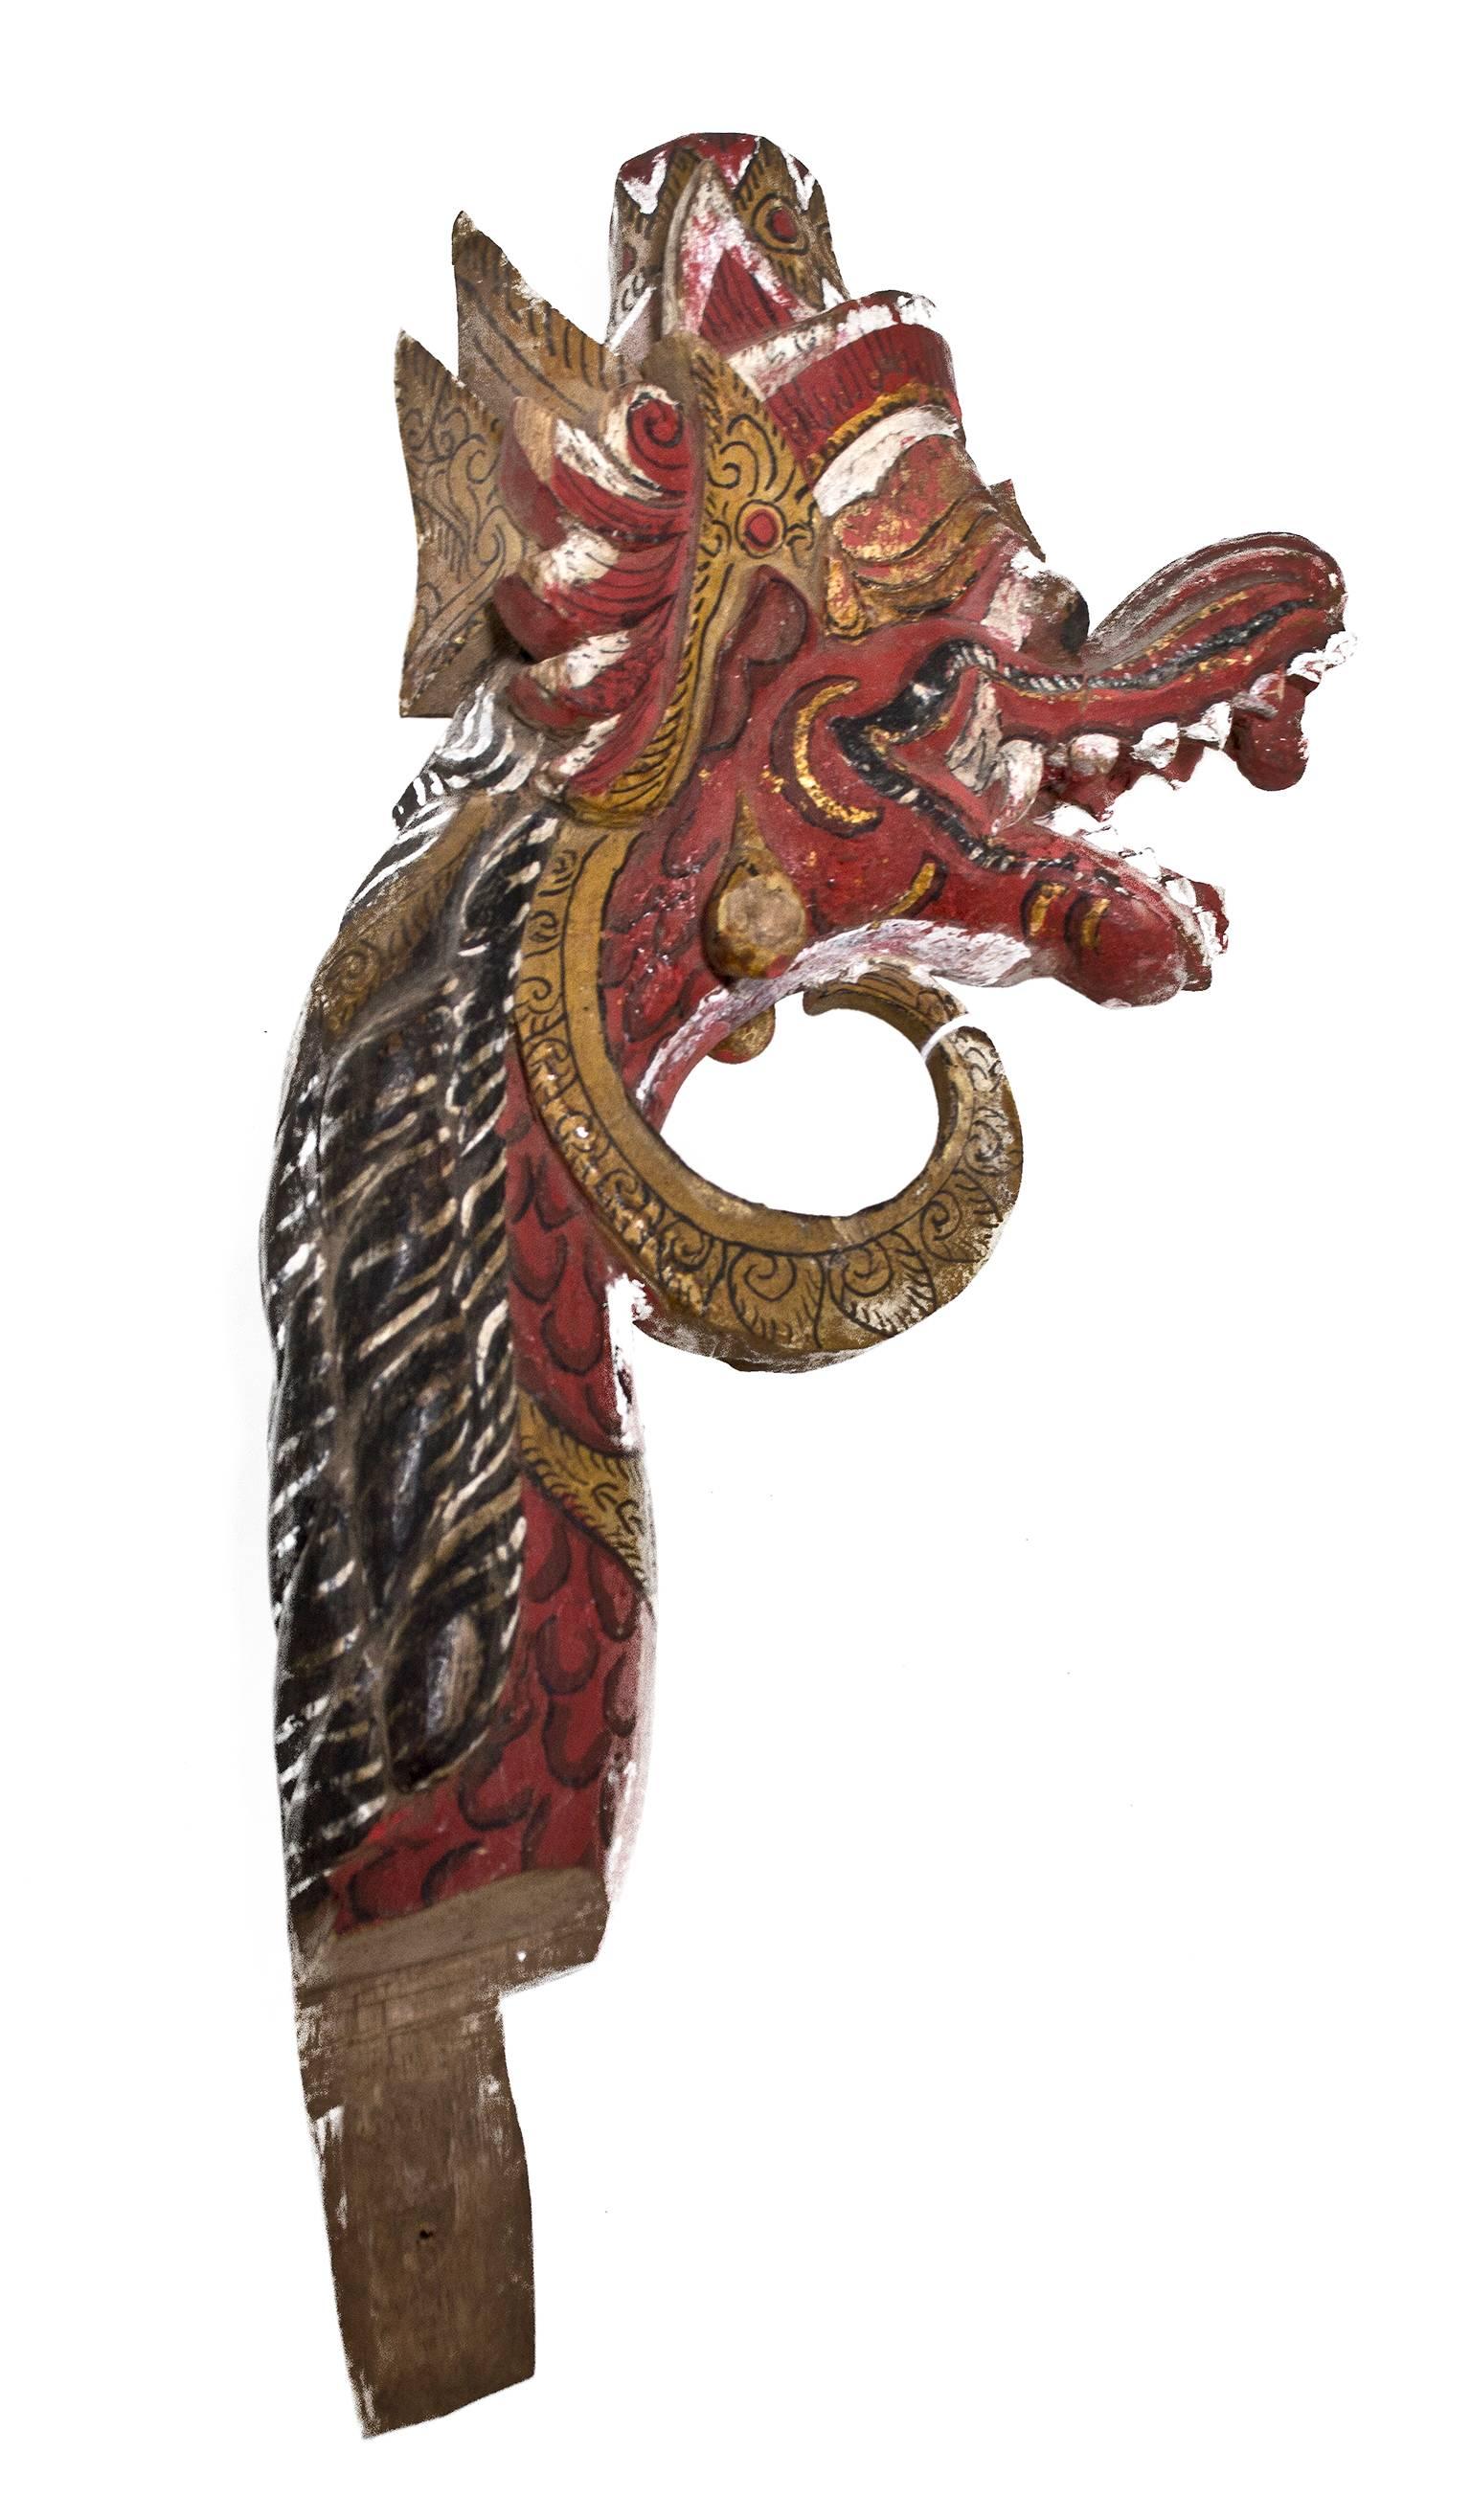 This Garuda finial was created by an unknown Indonesian artist out of wood. A finial or hip-knob is an element marking the top or end of some object, often formed to be a decorative feature. The sculpture is 10 1/2